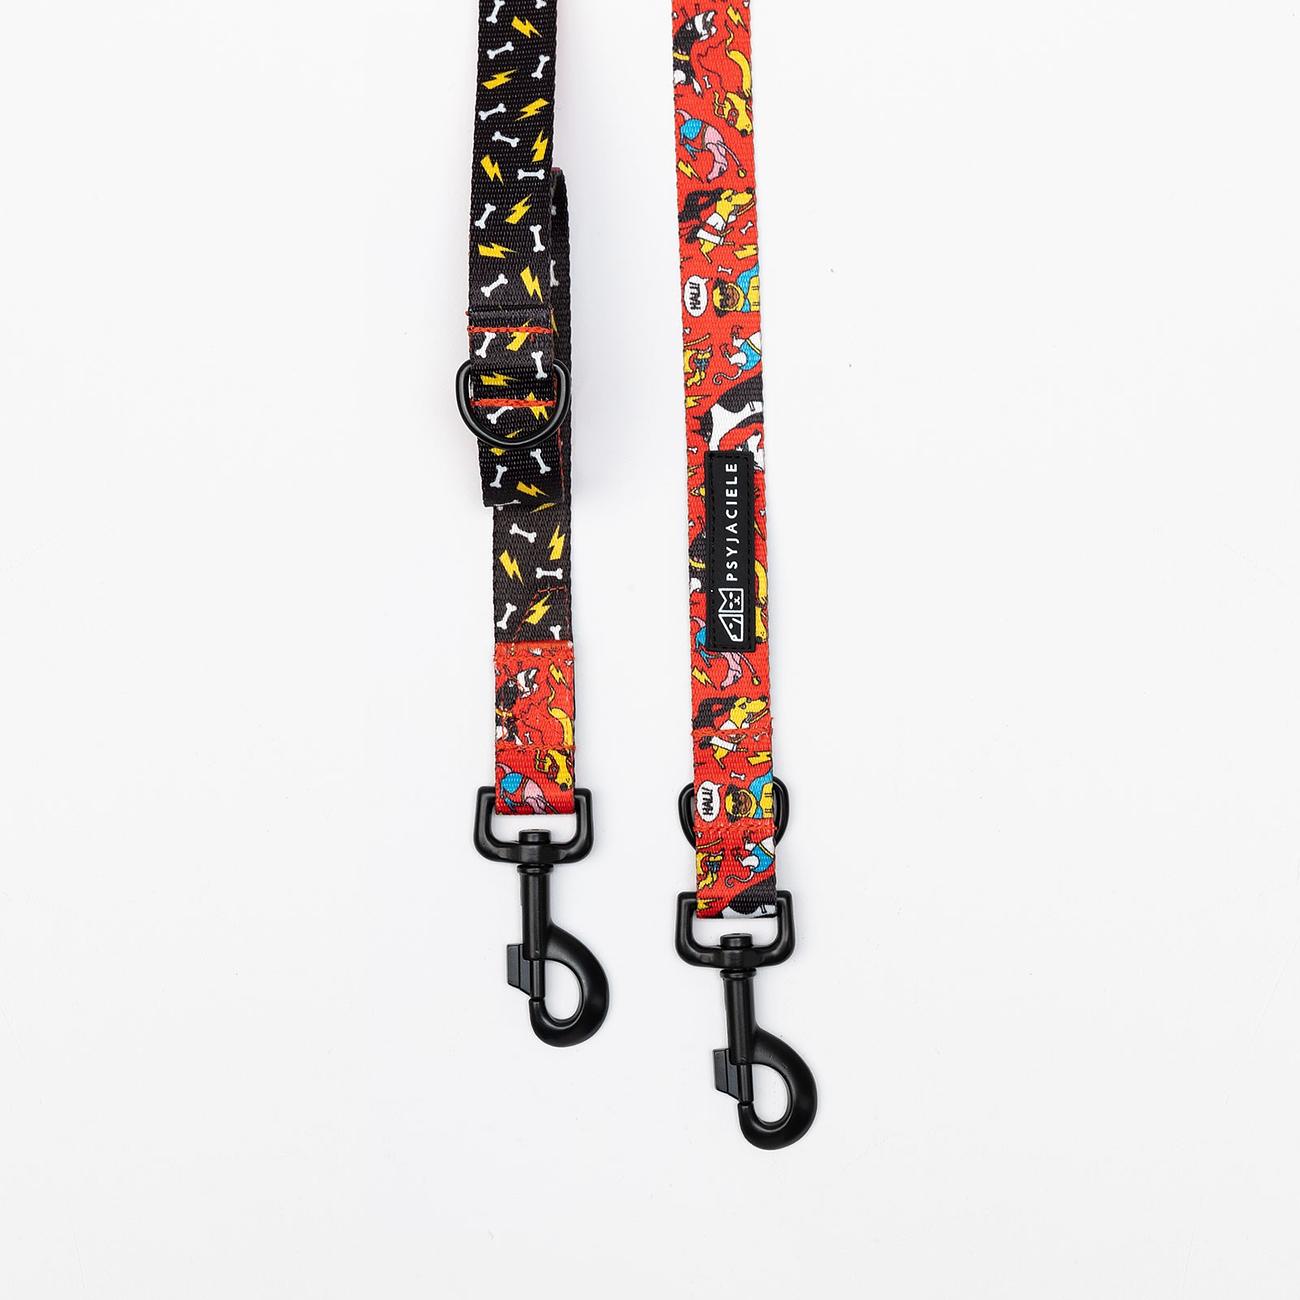 "Woof for the better world" leash